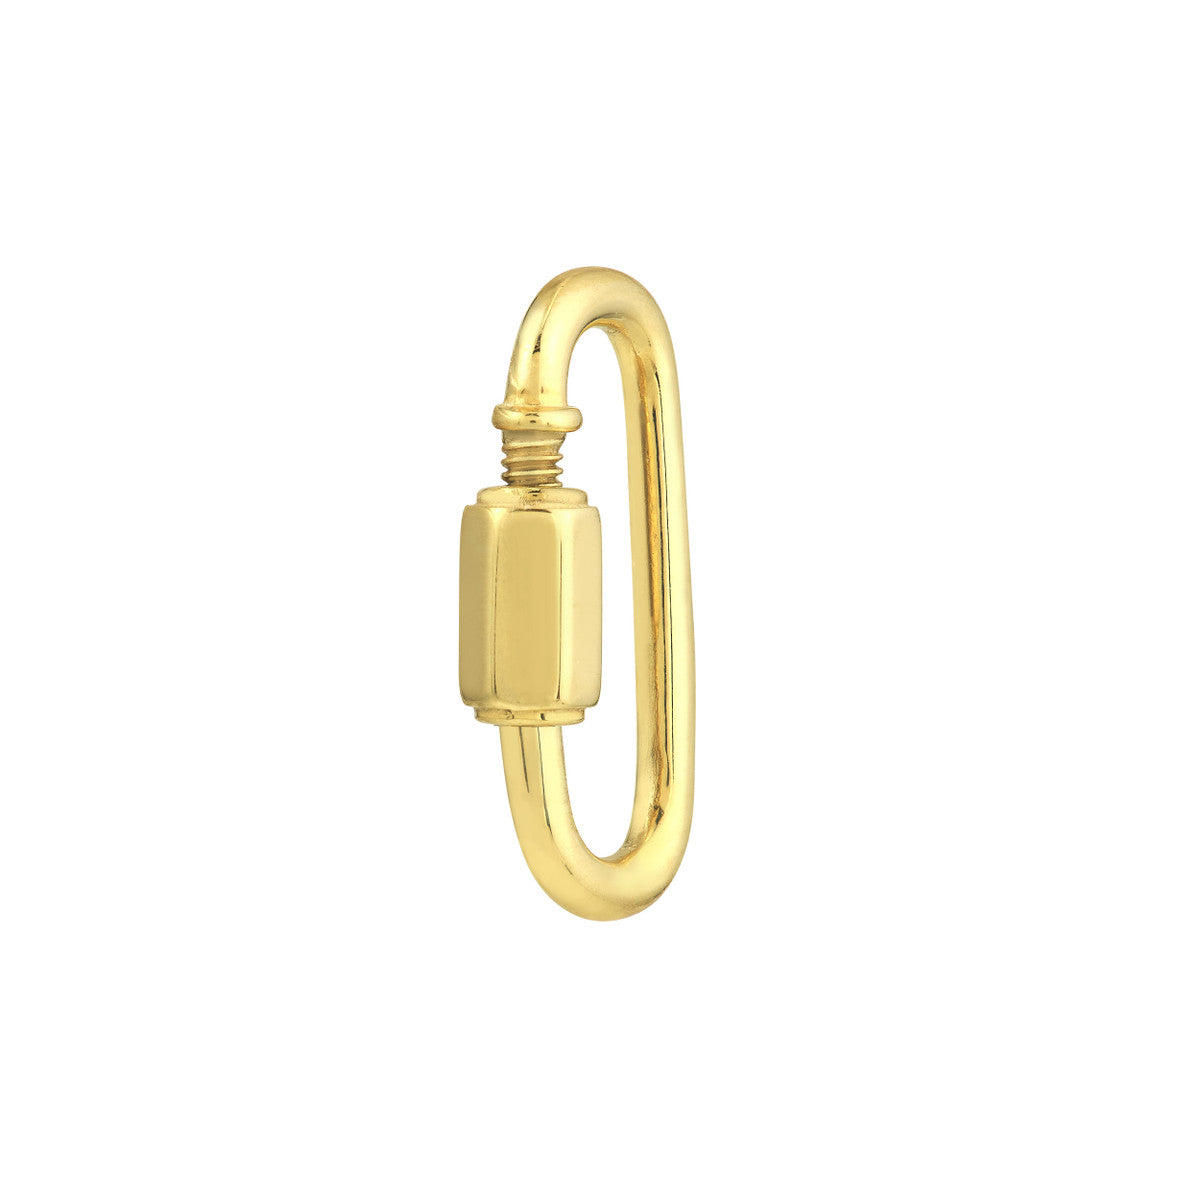 15mm 14k Yellow Gold Mini Baby Carabiner Screw Clasp Lock Finding Jewelry,  Solid 14k Gold Carabiner Clasp Lock Jewelry – Thesellerworld